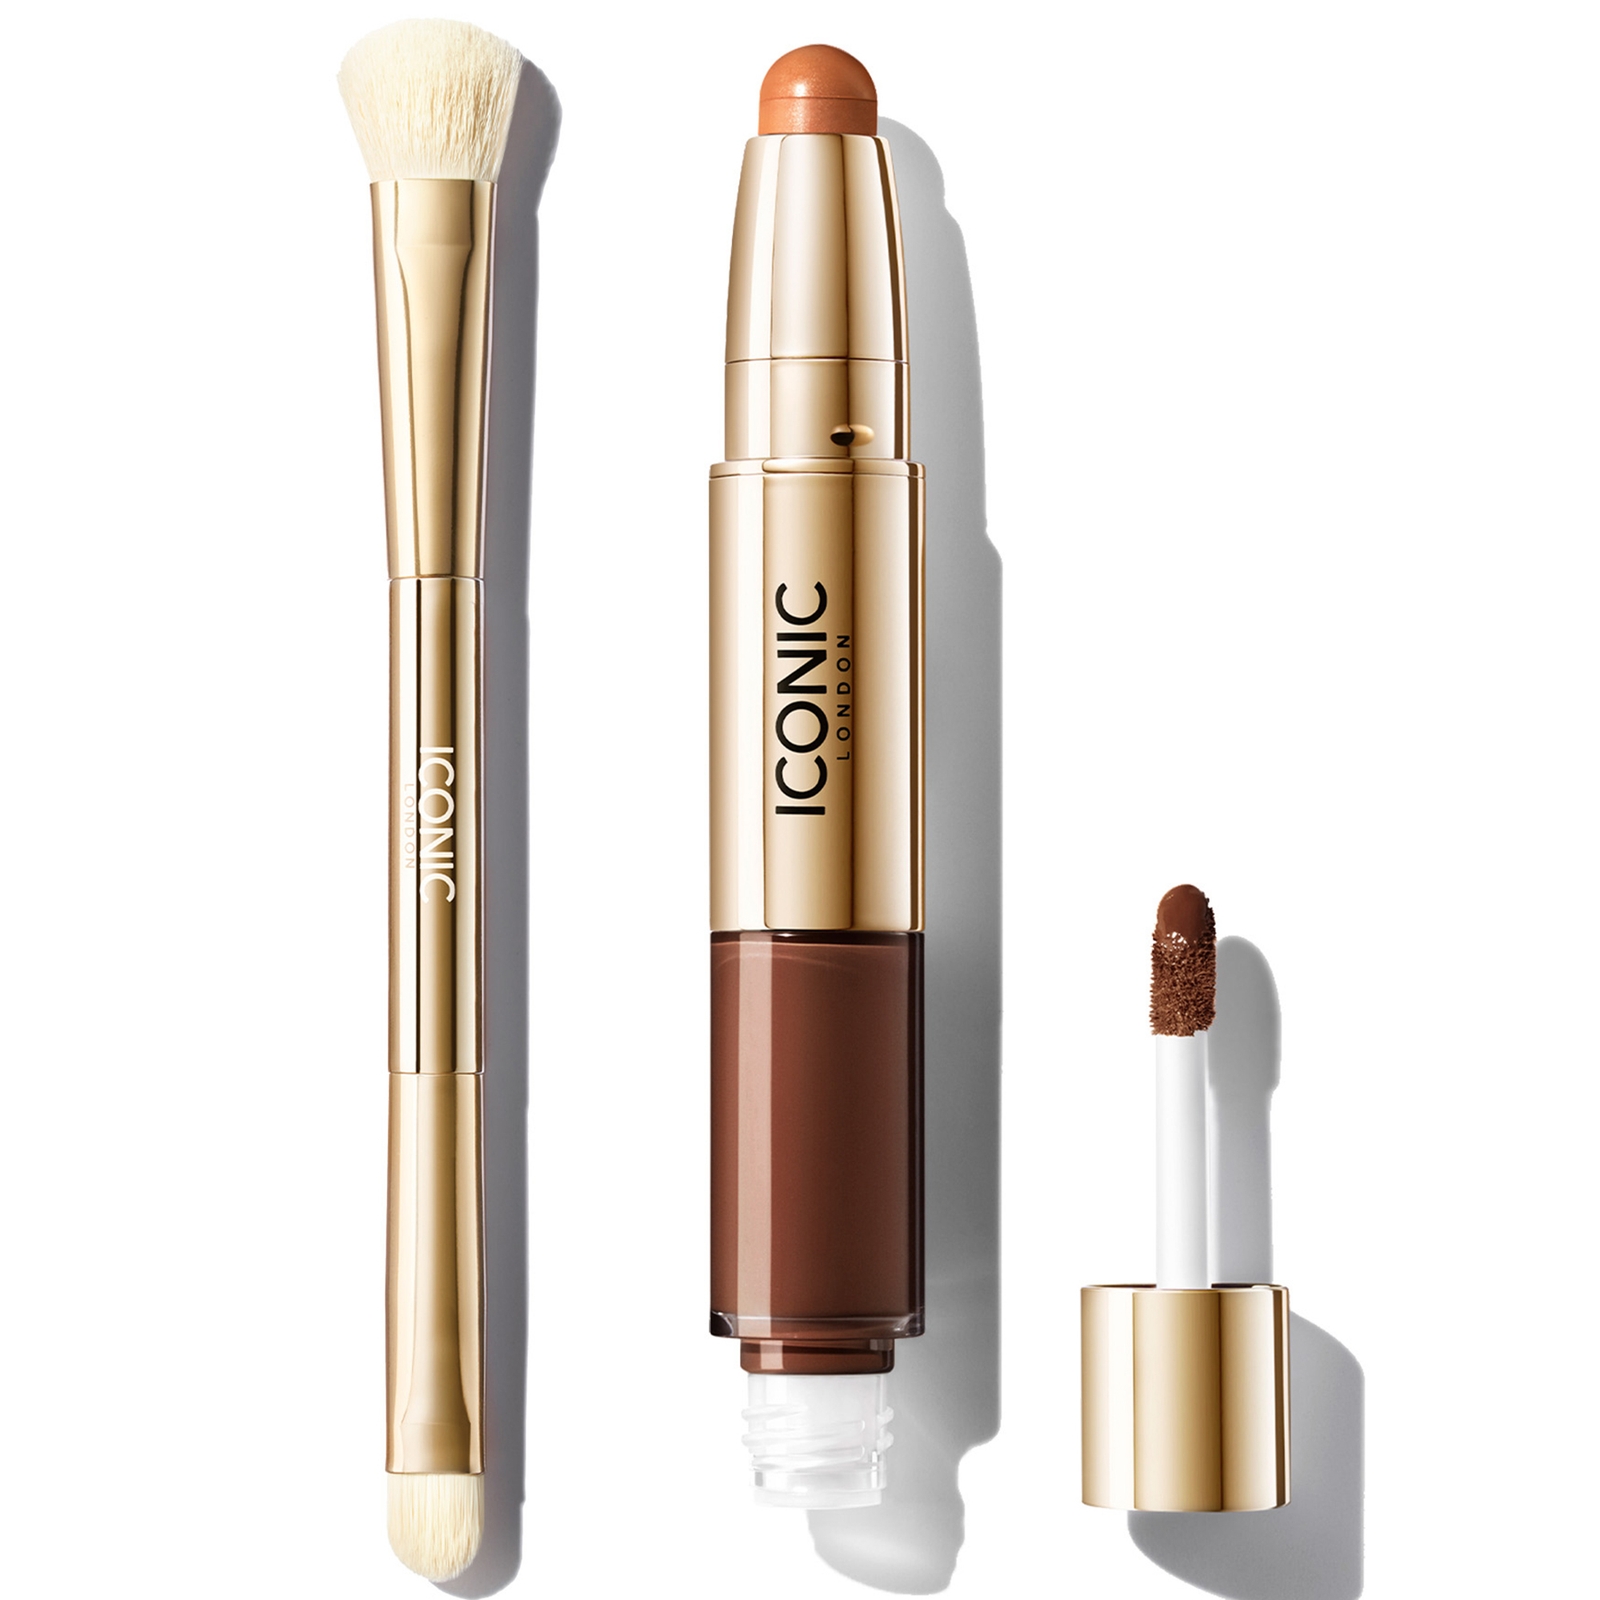 Iconic London Radiant Concealer And Brush Bundle (various Shades) - Neutral Rich